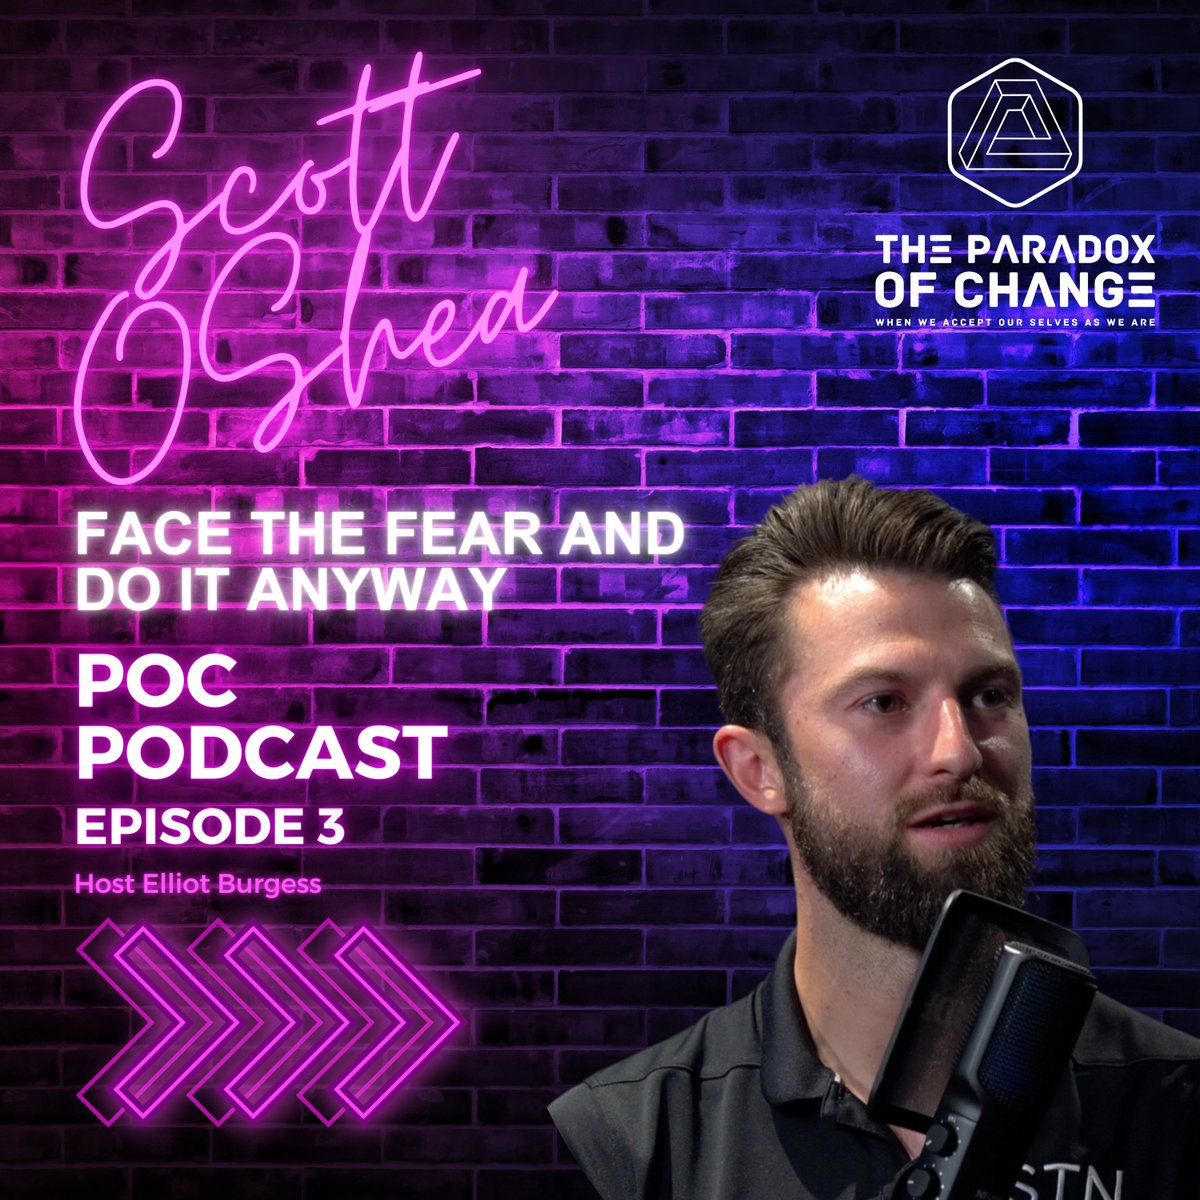 Listen to our inspiring podcast episode FACE THE FEAR AND DO IT ANYWAY.
youtube.com/watch?v=QMf94U…

#selfdiscovery #entrepreneurlife #burnout #mensmentalhealth #masculinity #lockdownmemories #healthandfitness #gymowner #gymlife #Mentalhealthweek2024 #mentalhealth